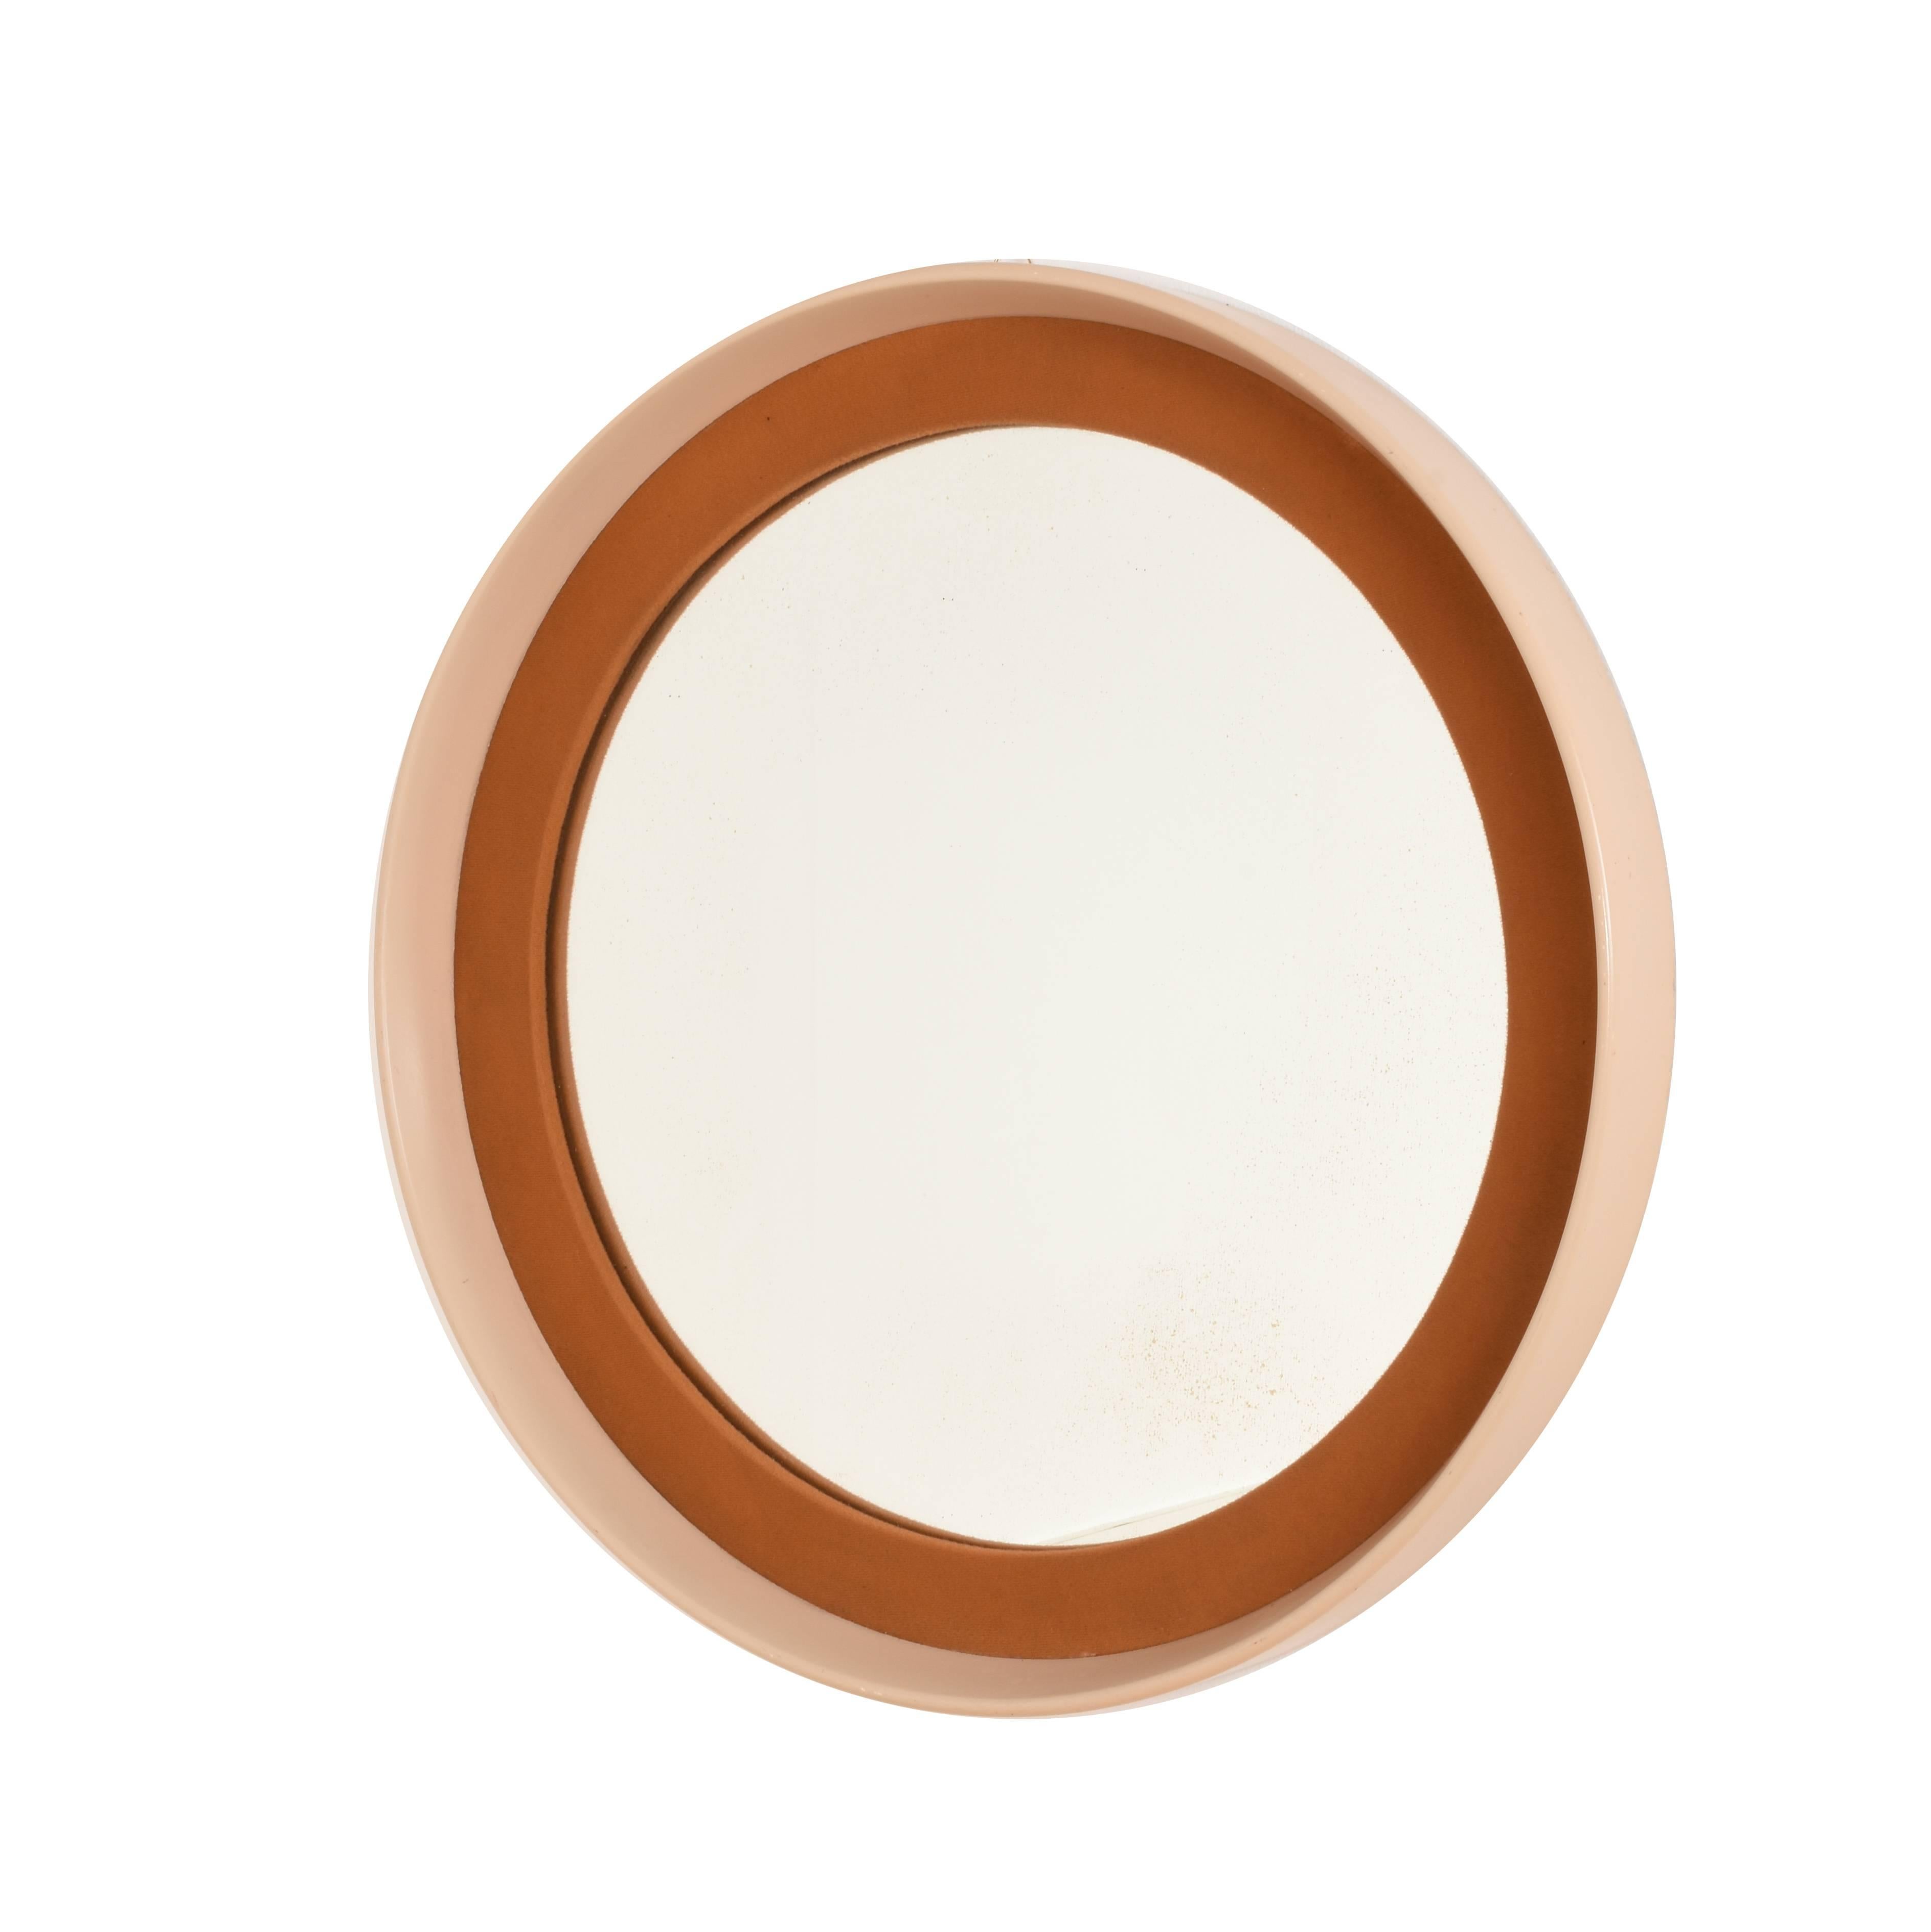 Mid-Century Modern Round Mirror with Frame in Lacquered Wood and Fabric, Italy, 1970s Midcentury For Sale